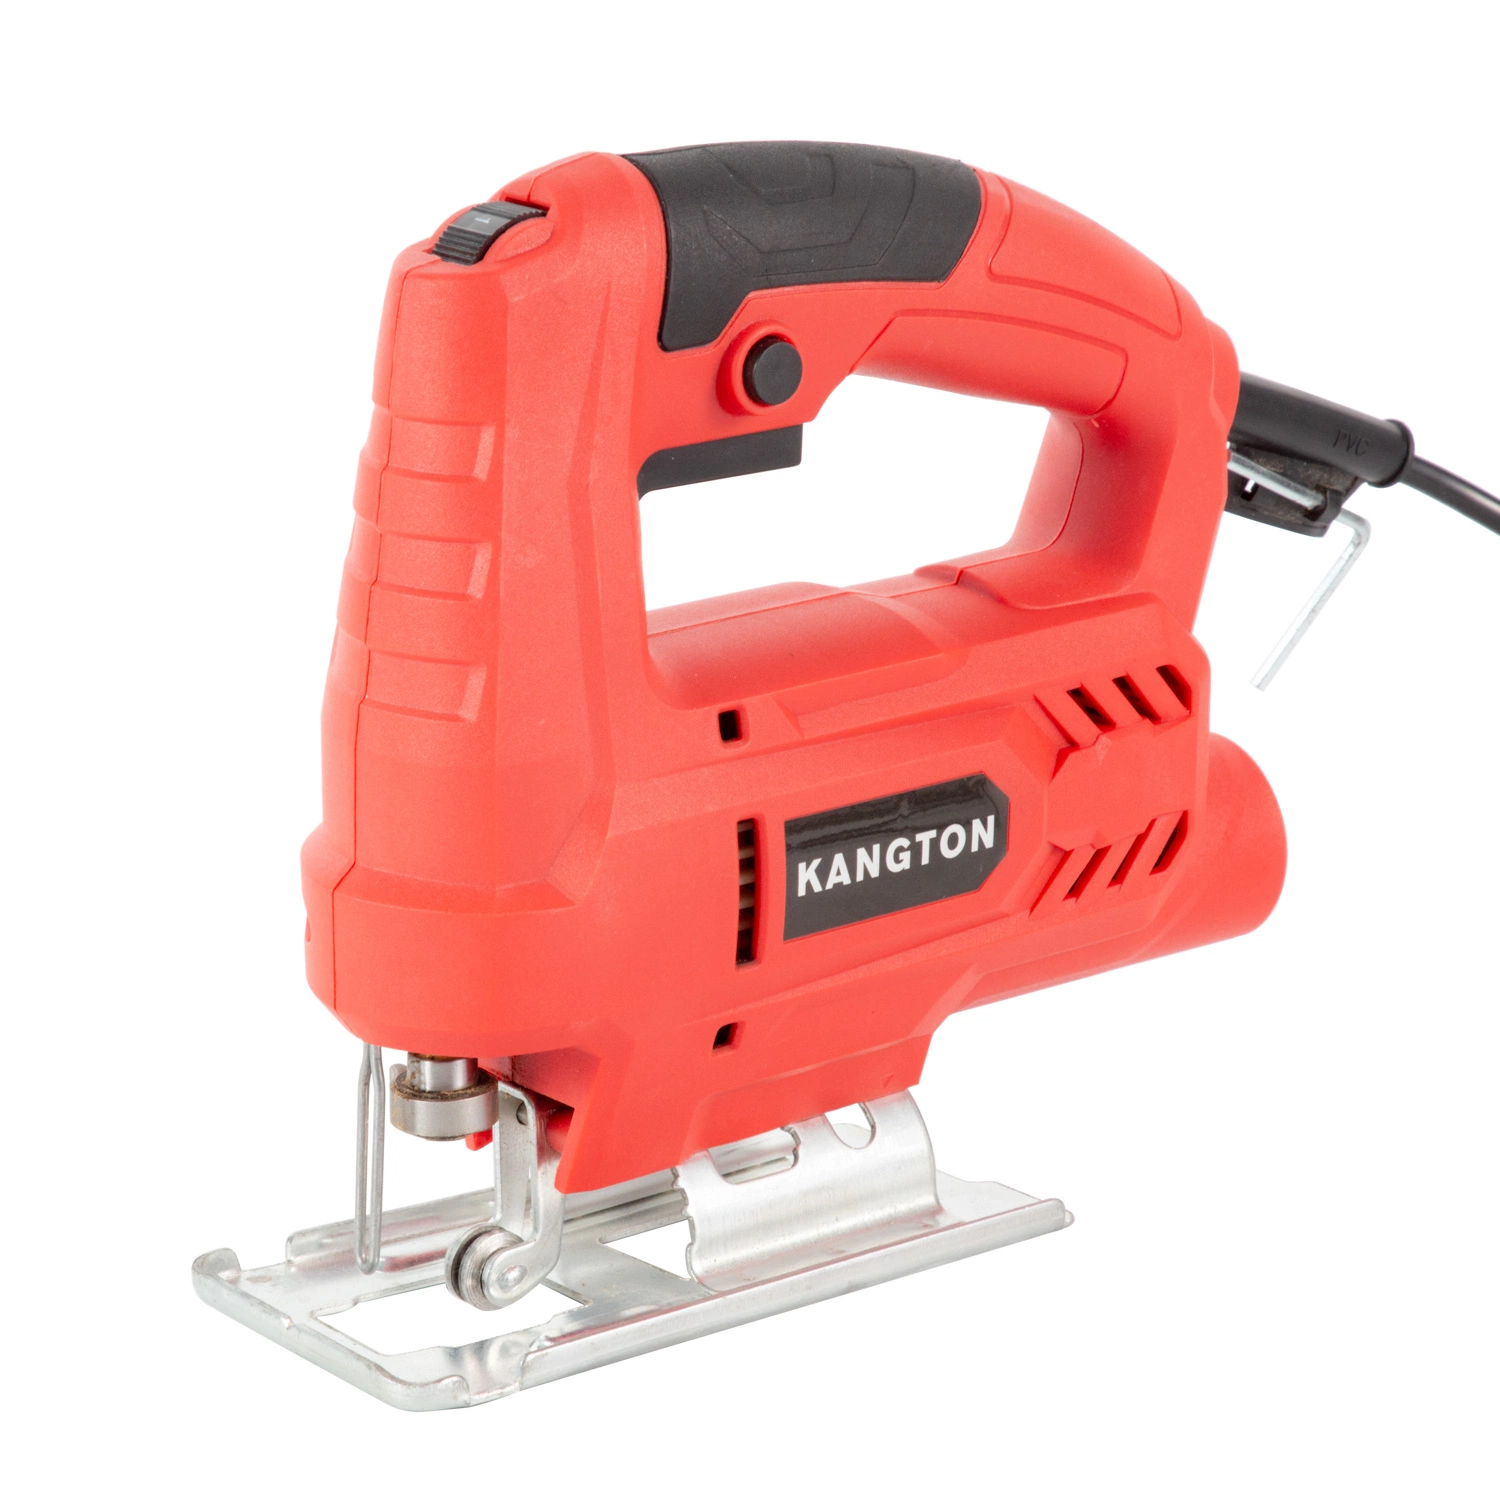 650W 55mm Corded Electric Portable Hand Wood Cutting Jig Saw